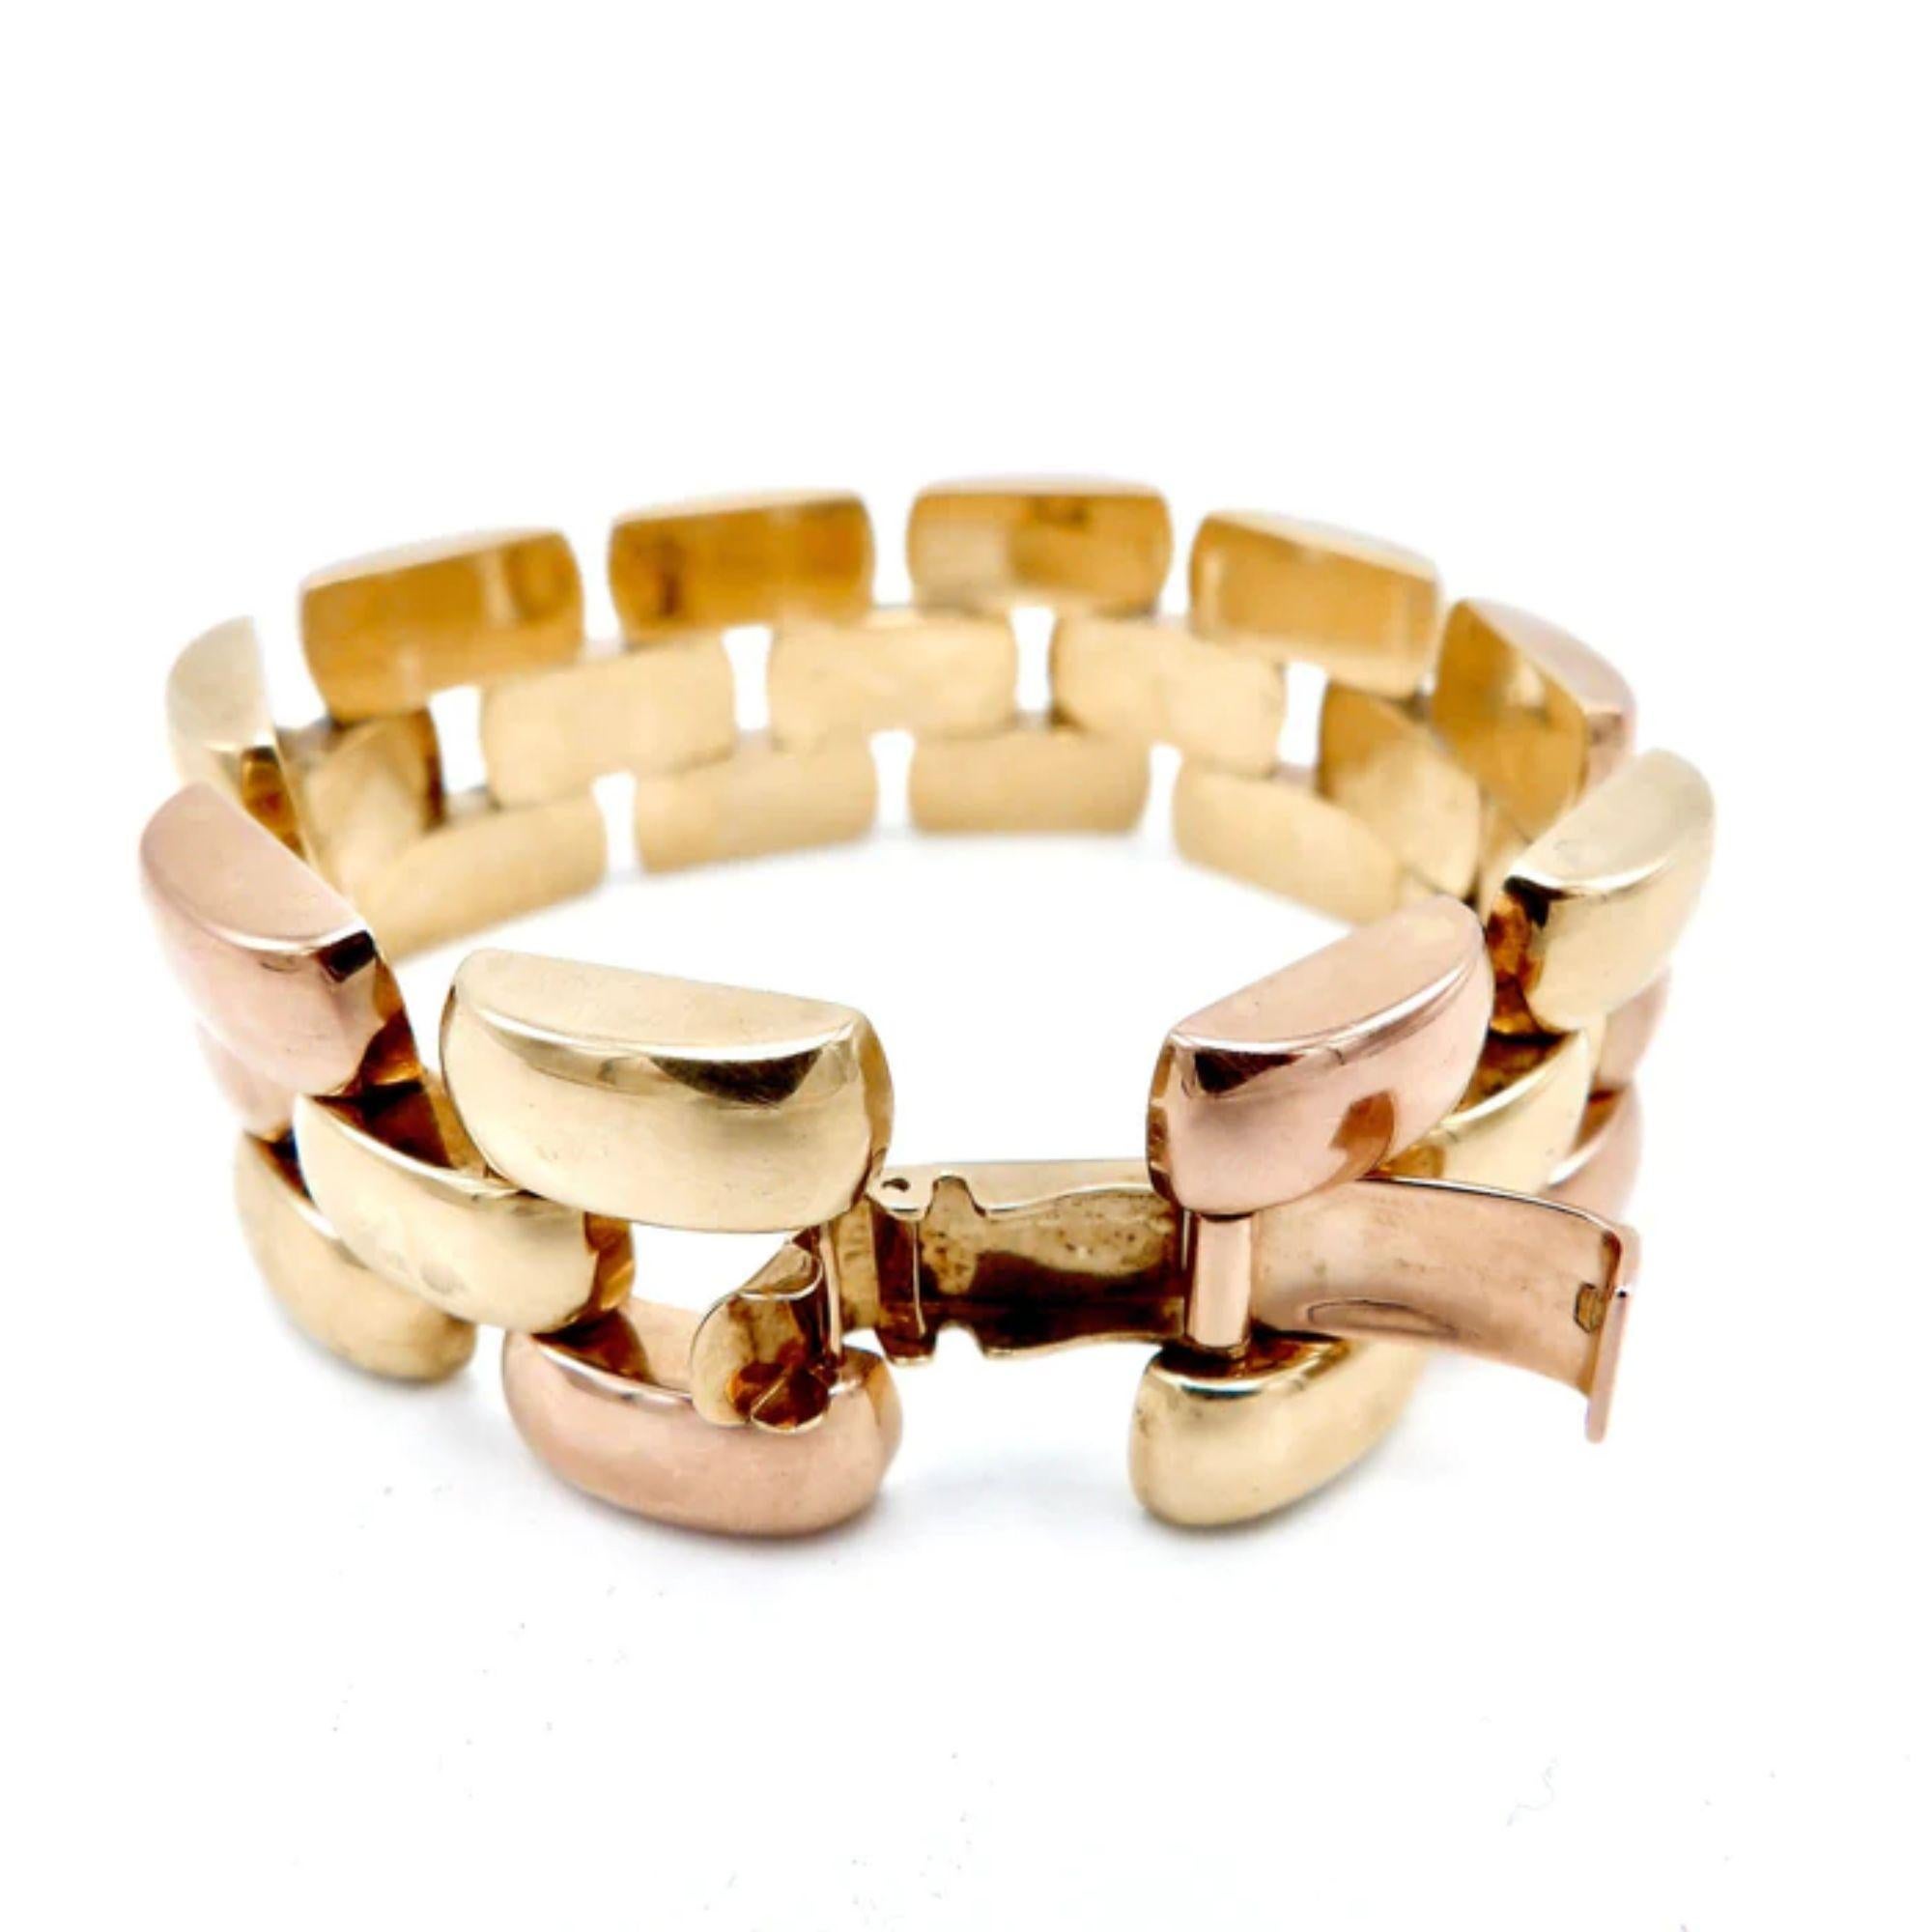 Retro 14K Rose and Yellow Gold Alternating Link Tank Bracelet In Good Condition For Sale In Venice, CA